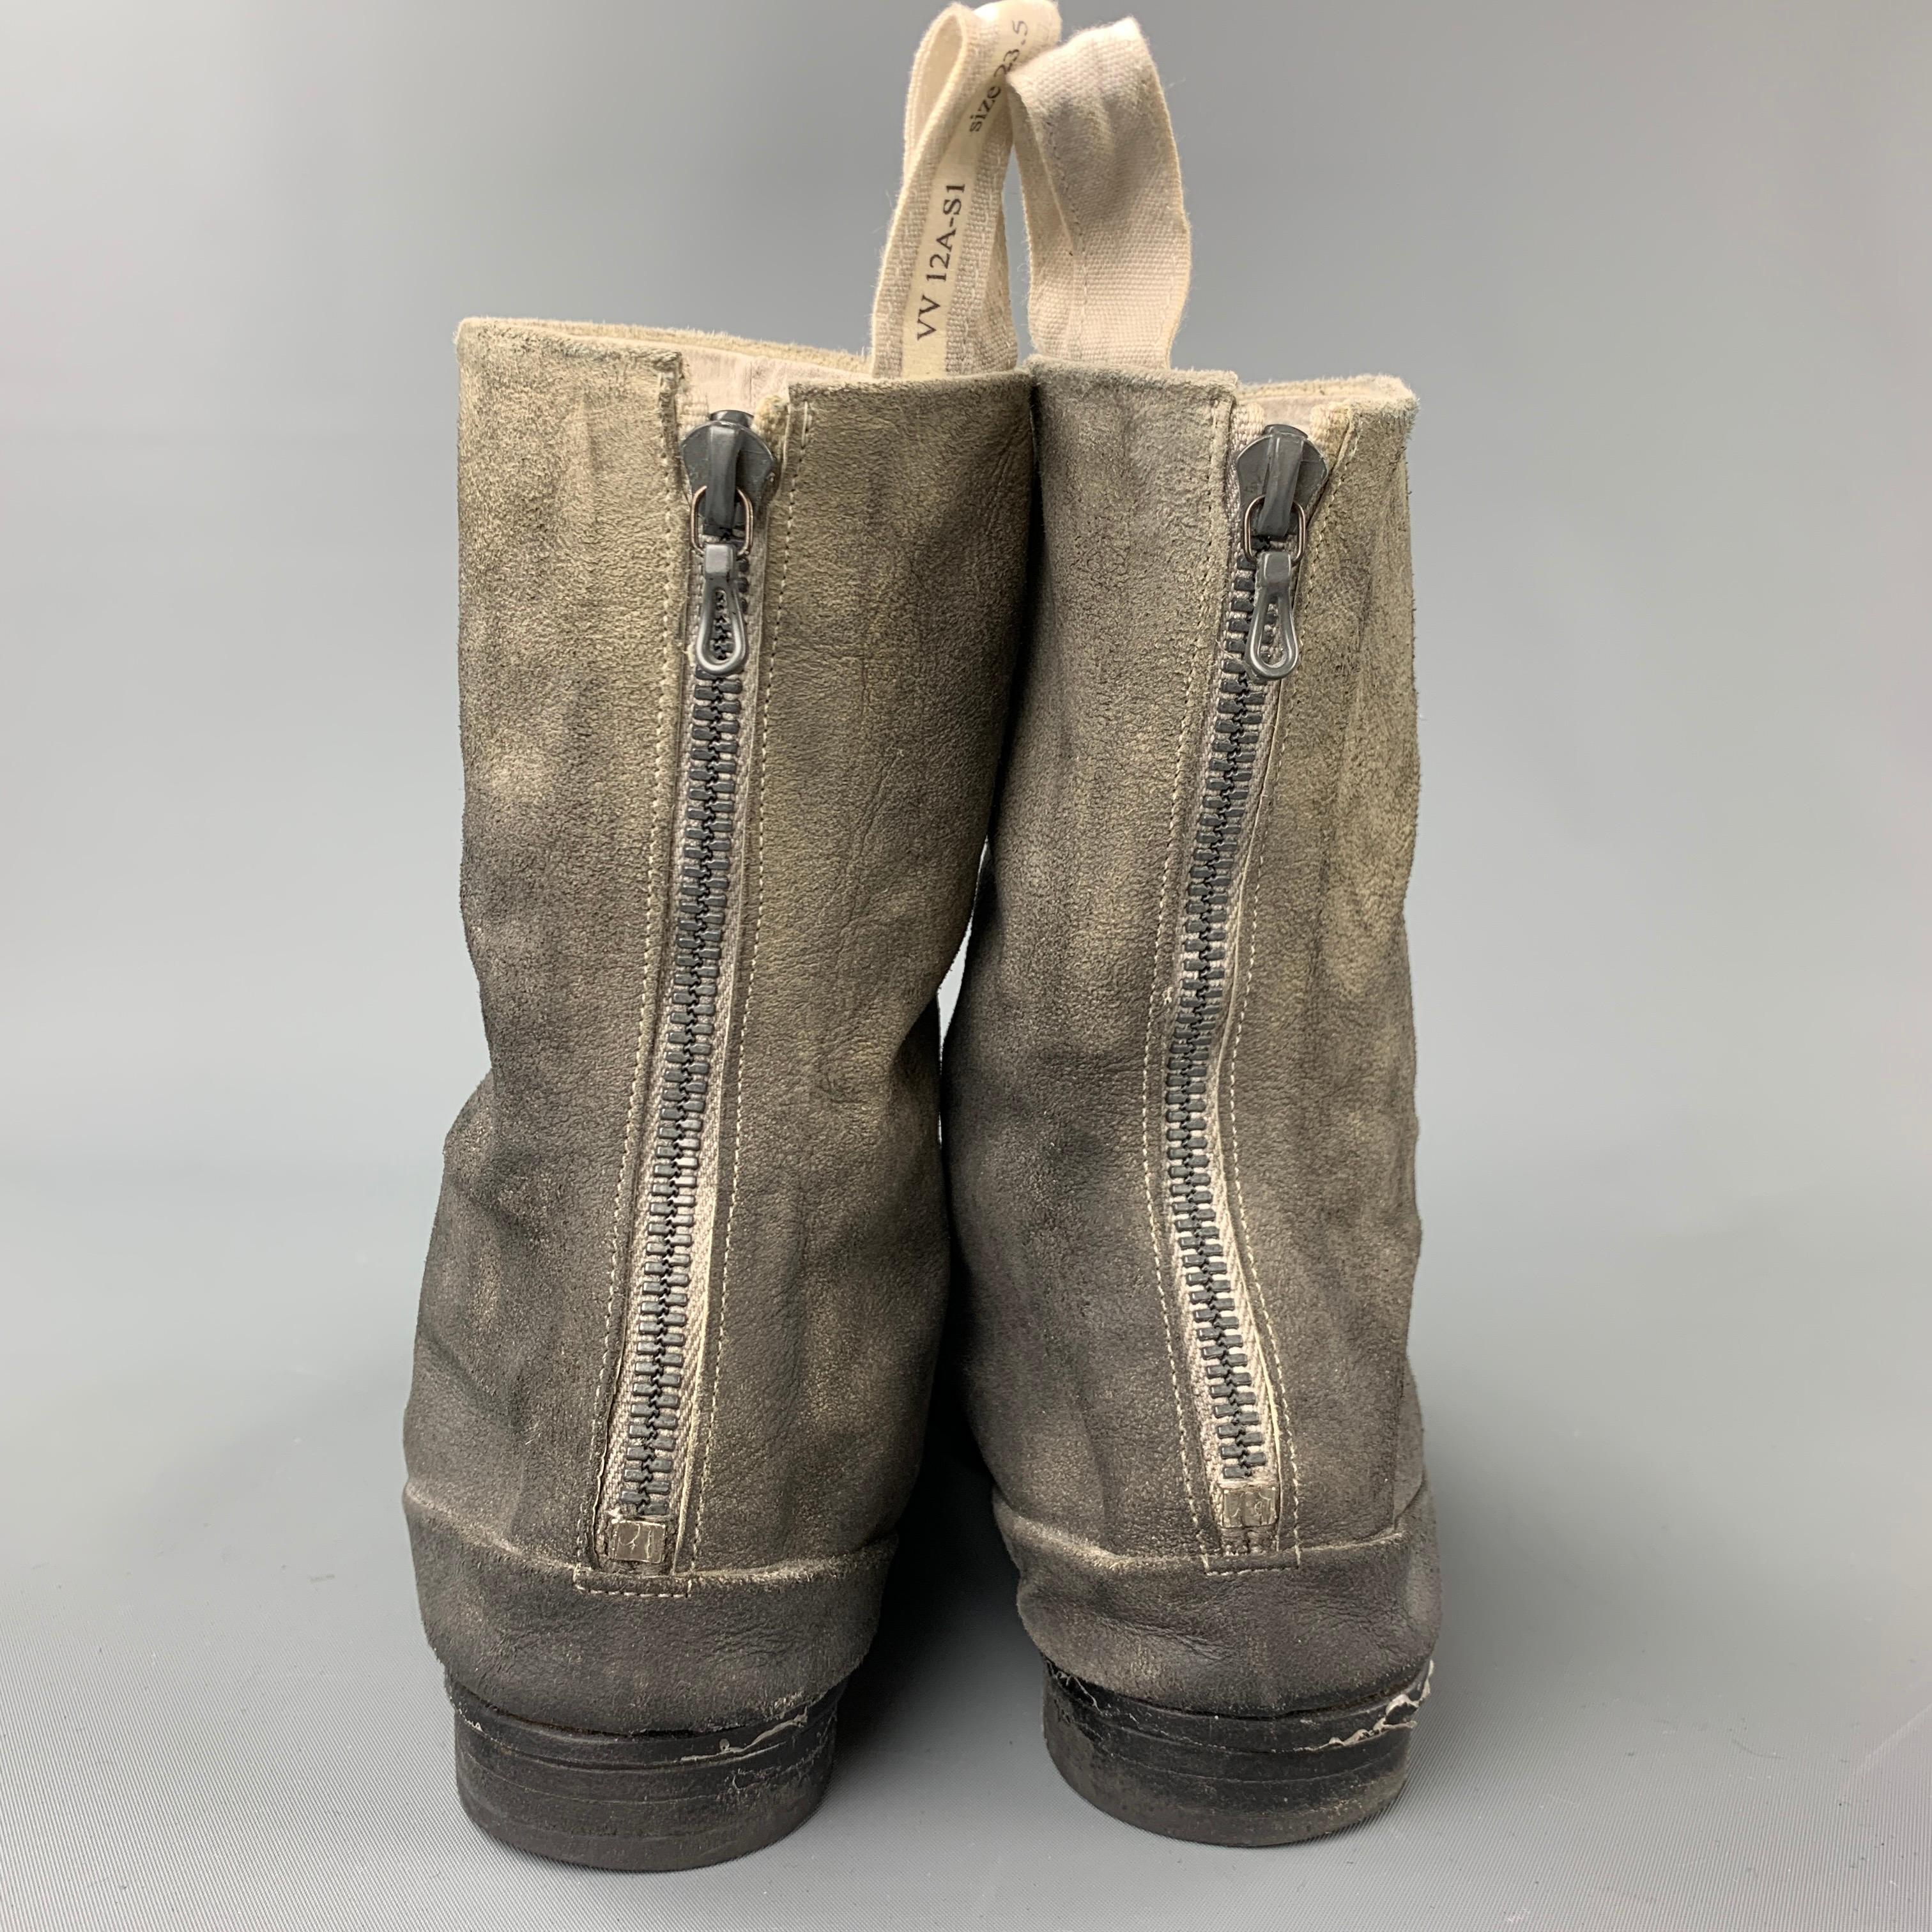 boots with wooden sole